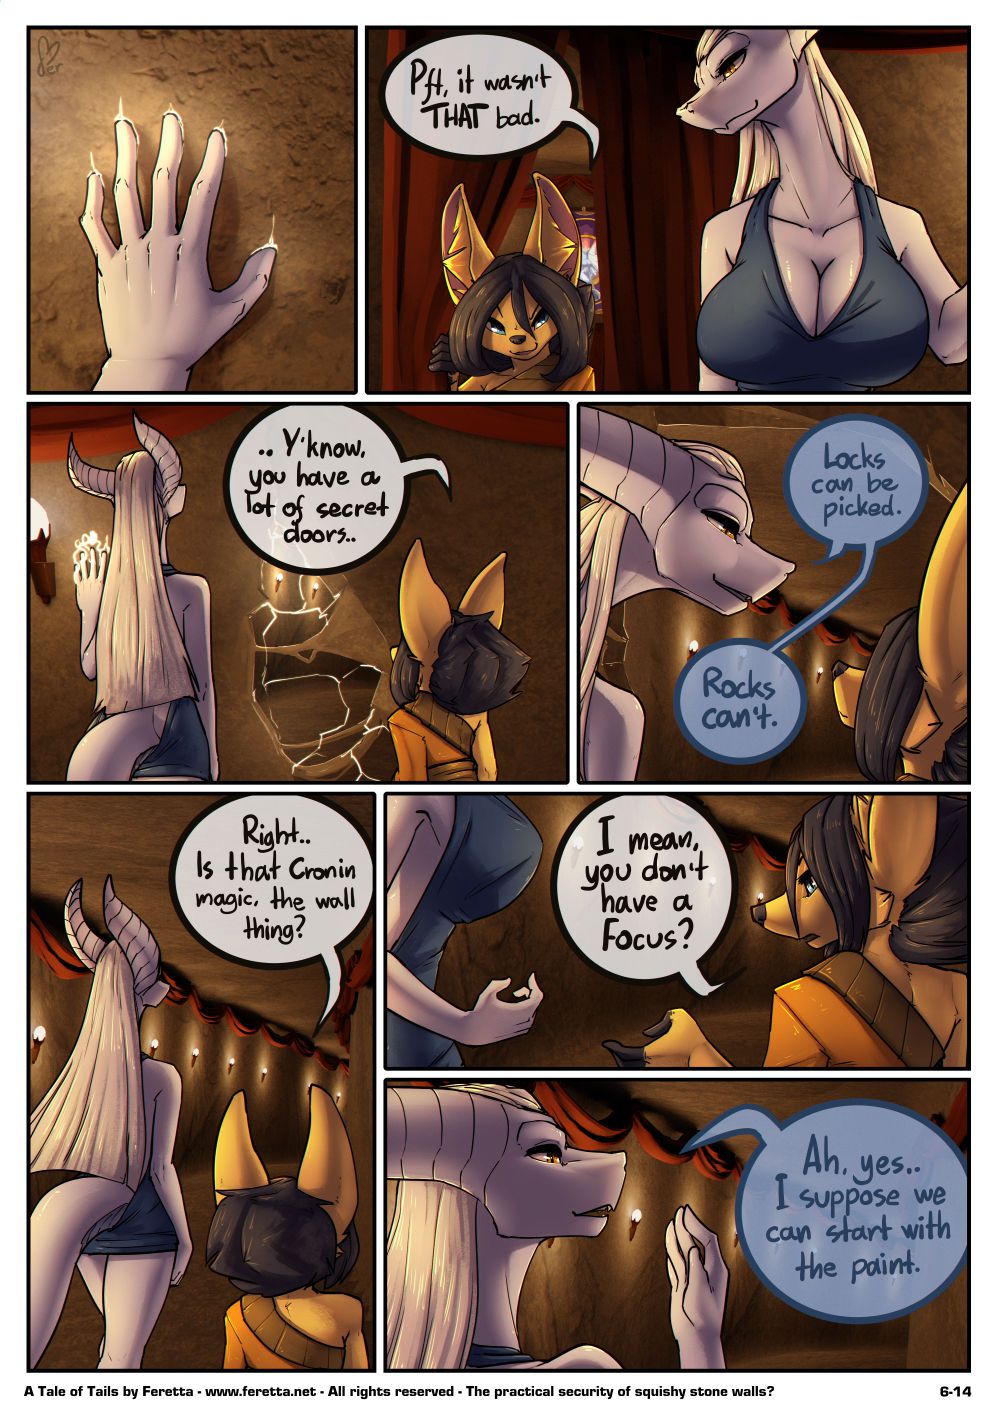 [Feretta] A Tale of Tails: Chapter 6 - Paths converge (ongoing) 15